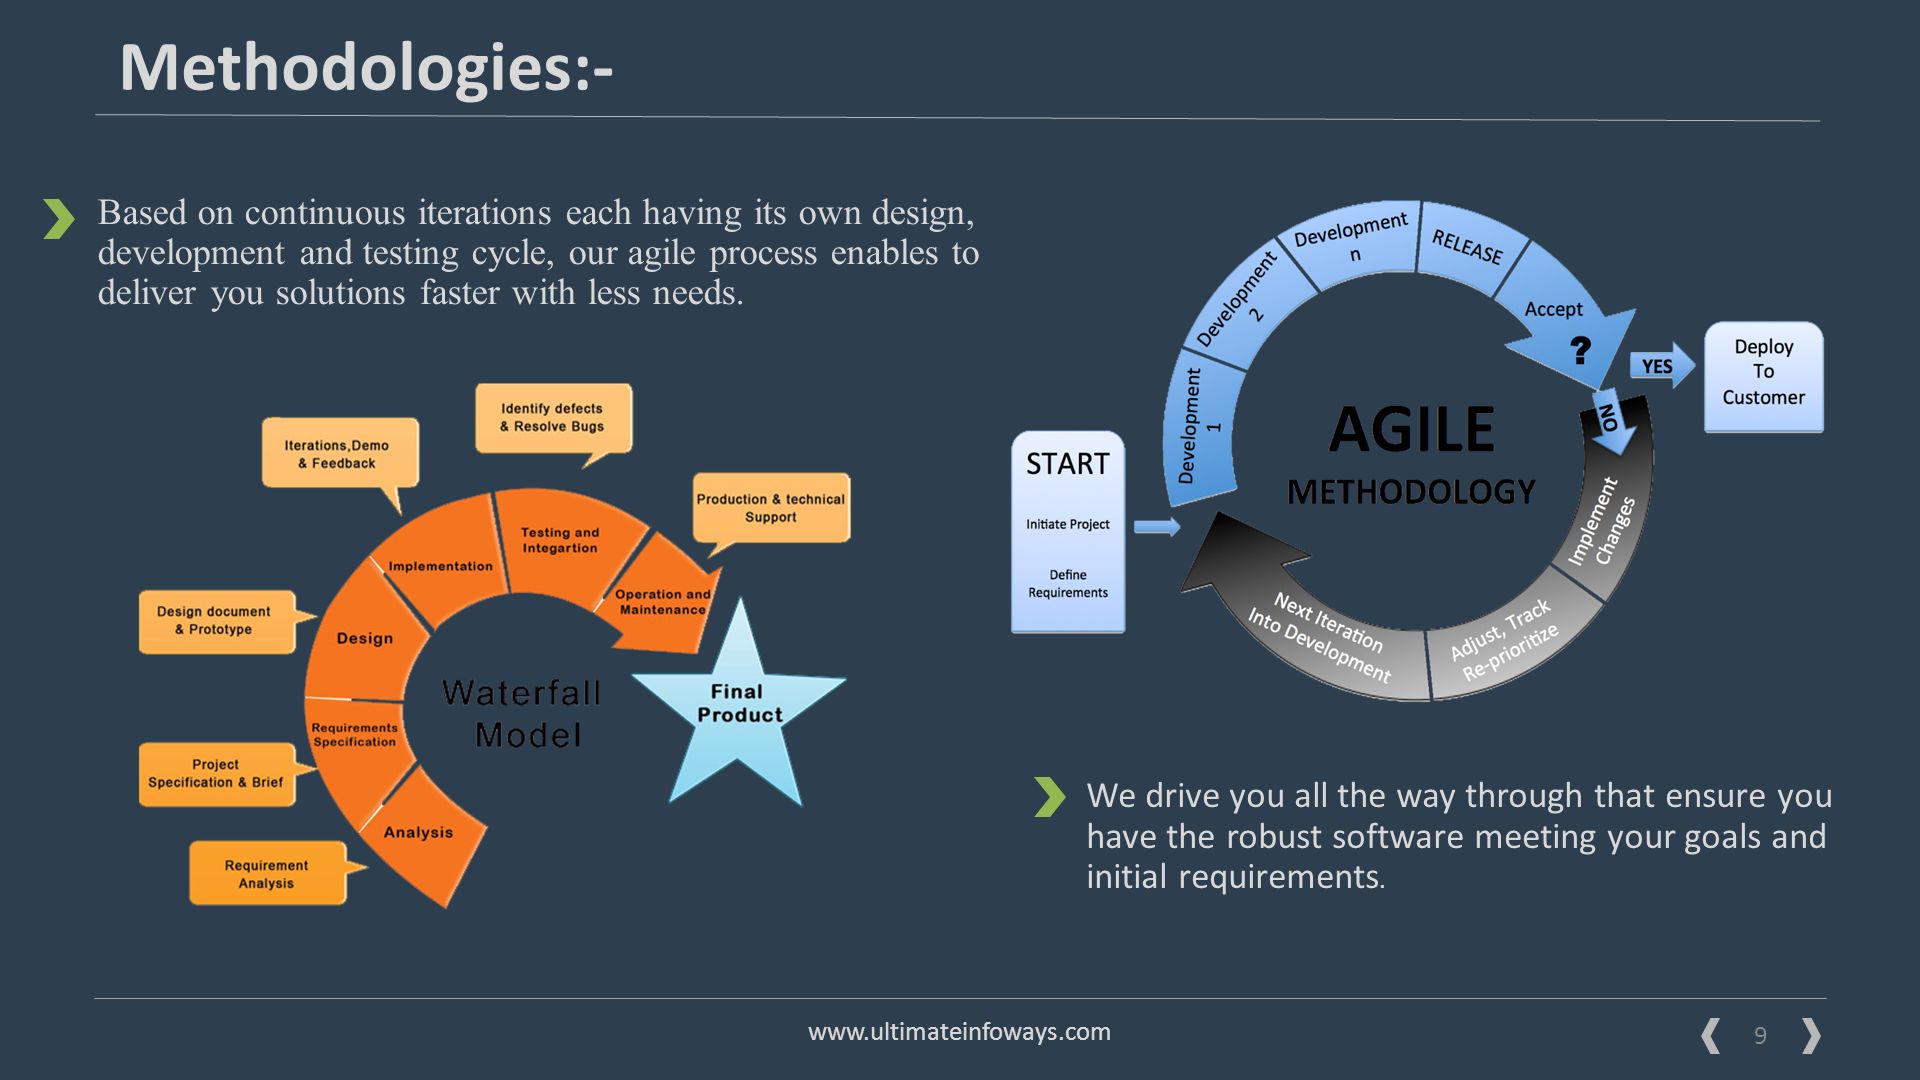 9 Solutions   Methodologies:- Based on continuous iterations each having its own design, development and testing cycle, our agile process enables to deliver you solutions faster with less needs.